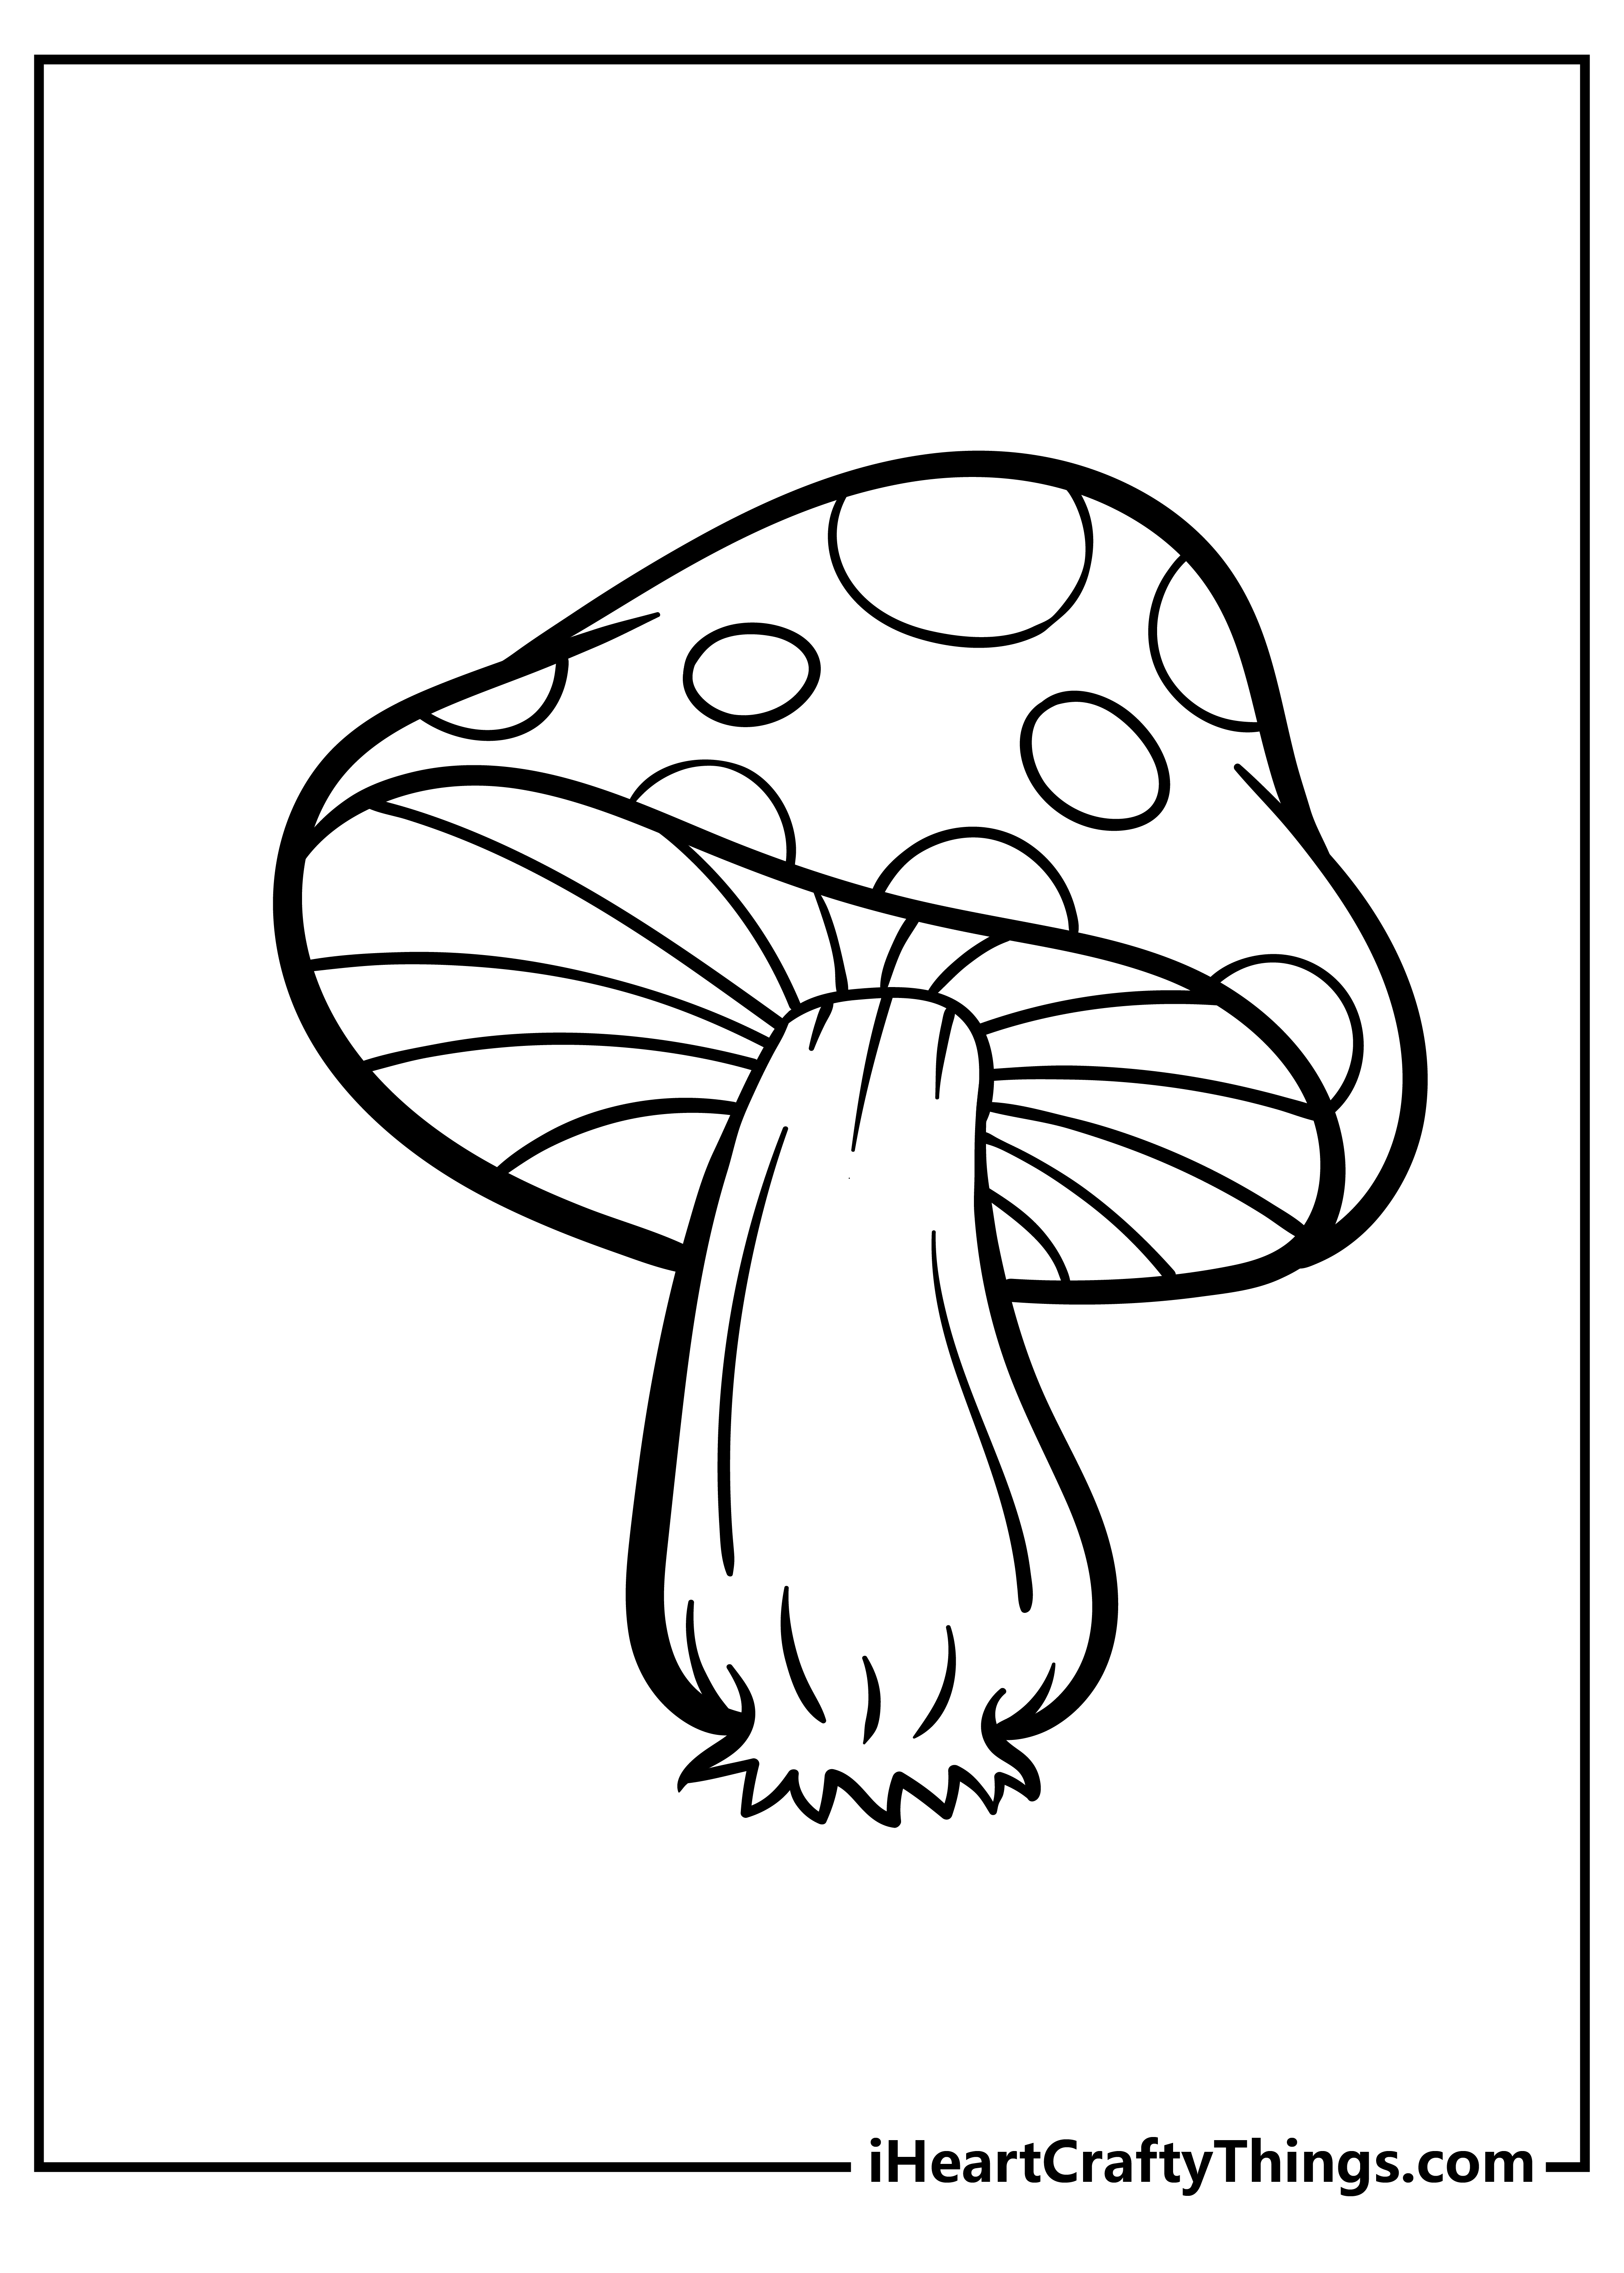 Mushroom Coloring Pages for adults free printable